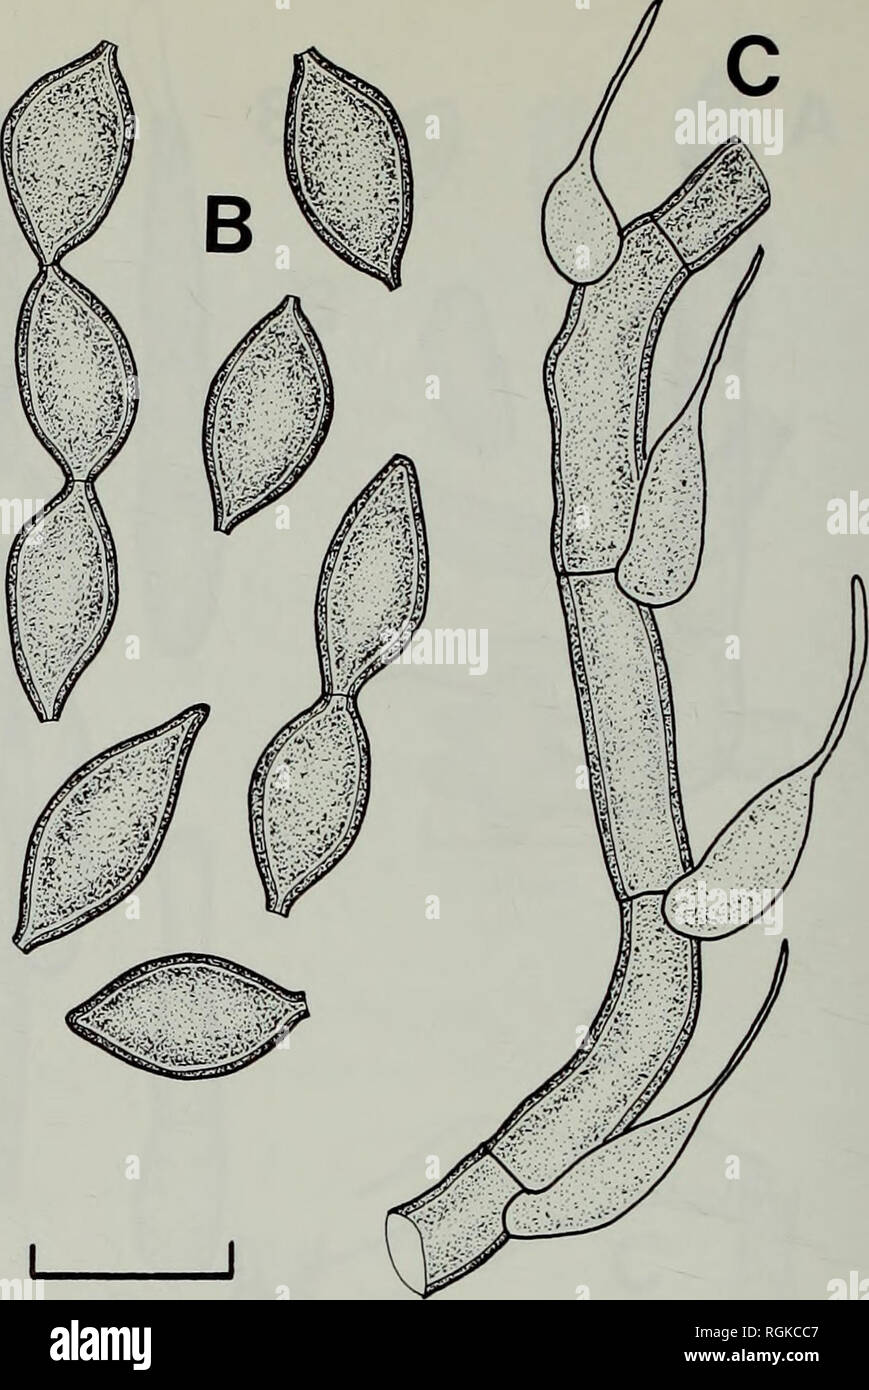 . Bulletin of the British Museum (Natural History) Botany. . 10/xm Fig. 8 Ampullifera ugandensis (IMI 25518d—holotype). A, Conidiophore. B, Conidia. C, Mycelium with hyphopodia. constricted at the septa, cells very variable in length, mainly 3-6 urn wide; hyphopodia abundant, arising laterally near the distal septum on almost all cells, mainly singly and alternate but some- times opposite, pale brown, paler than the hyphae from which they arise, elongate-ampulliform, mainly 7-14x2-5-4 urn, excluding the mucronate neck which may be as much as 20x1 um. Conidiophores macronematous, mononematous,  Stock Photo